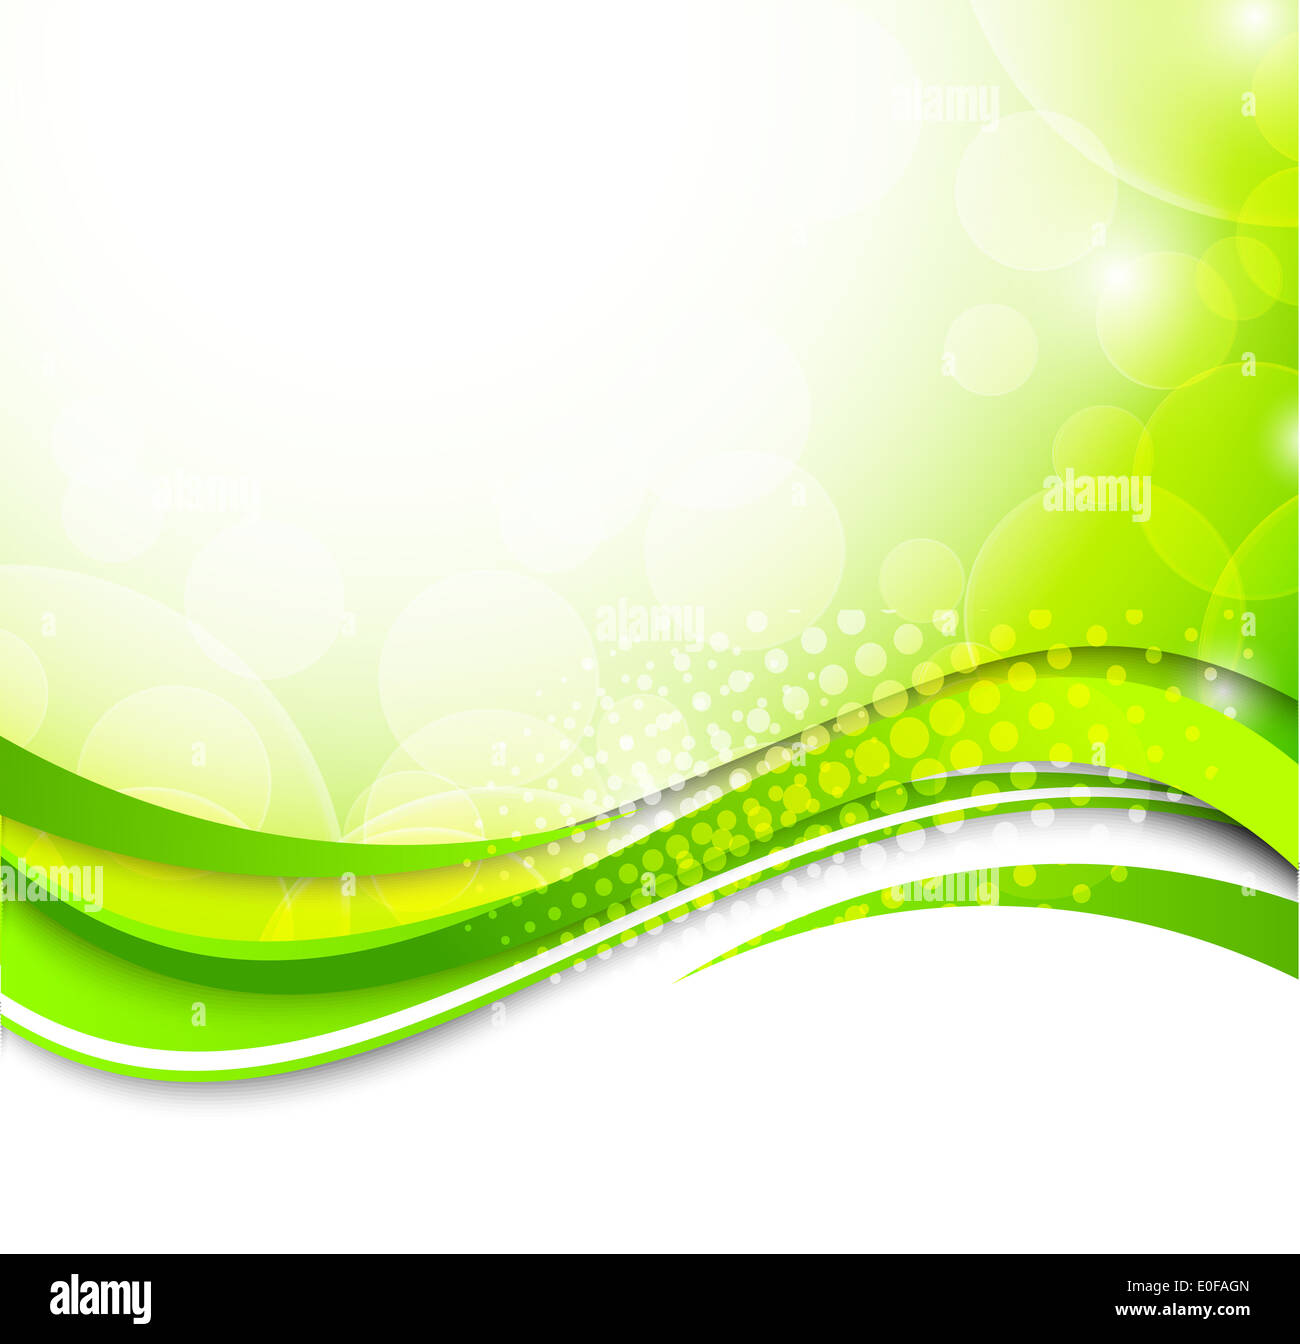 Abstract green background Stock Photo - Alamy